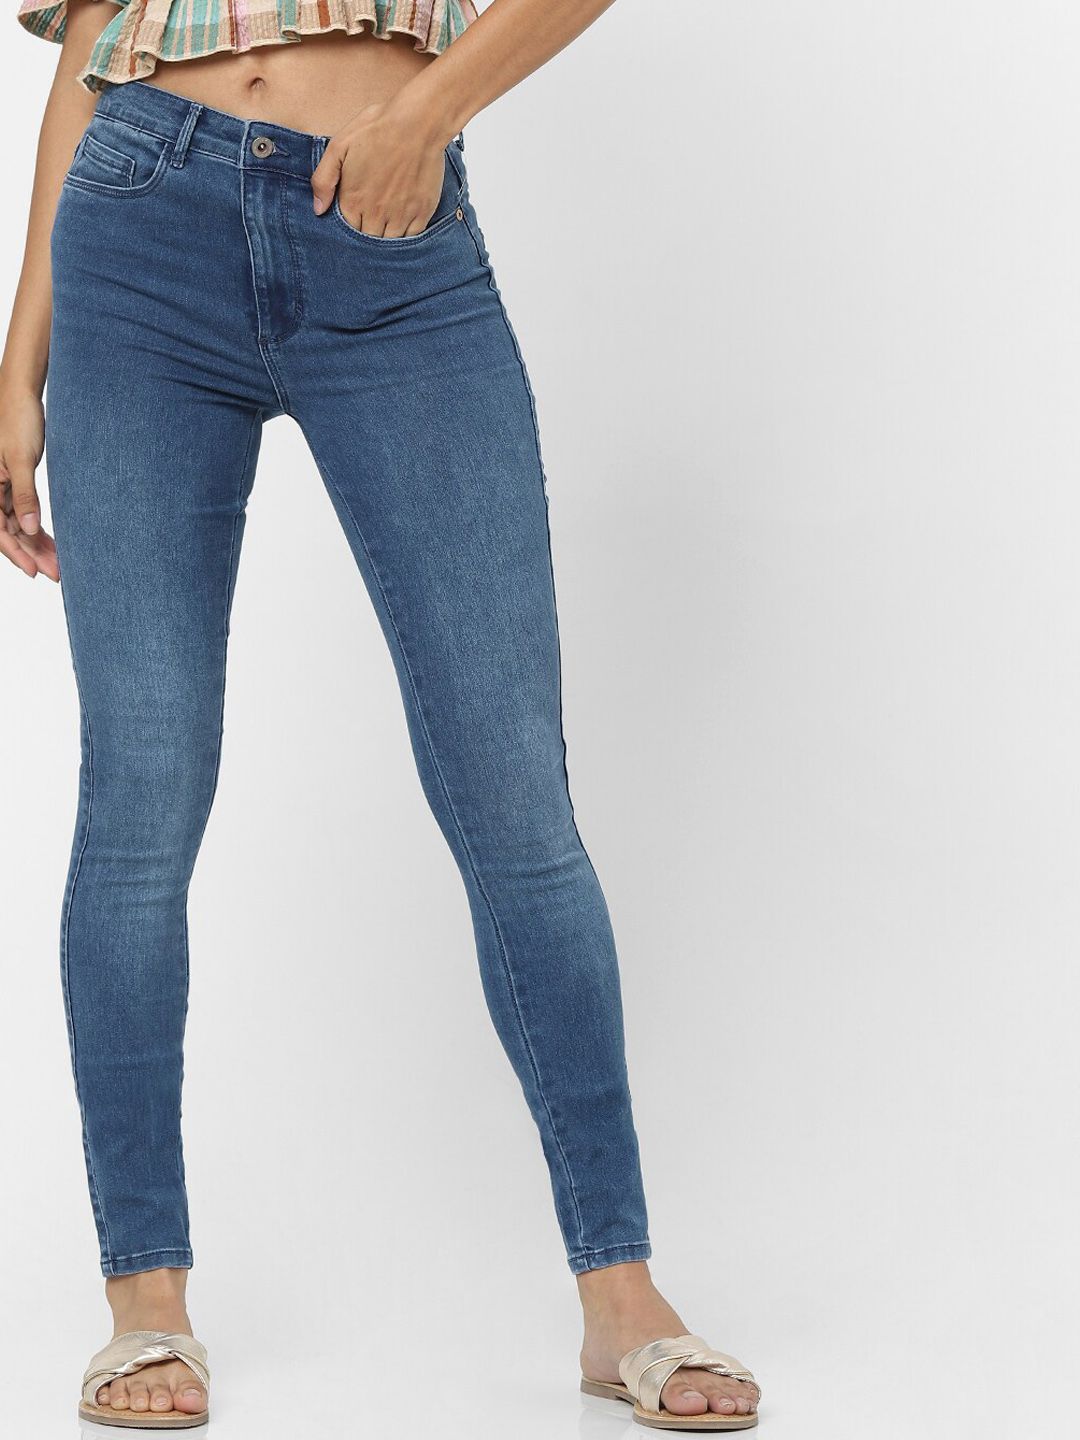 ONLY Women Blue Skinny Fit High-Rise Light Fade Jeans Price in India